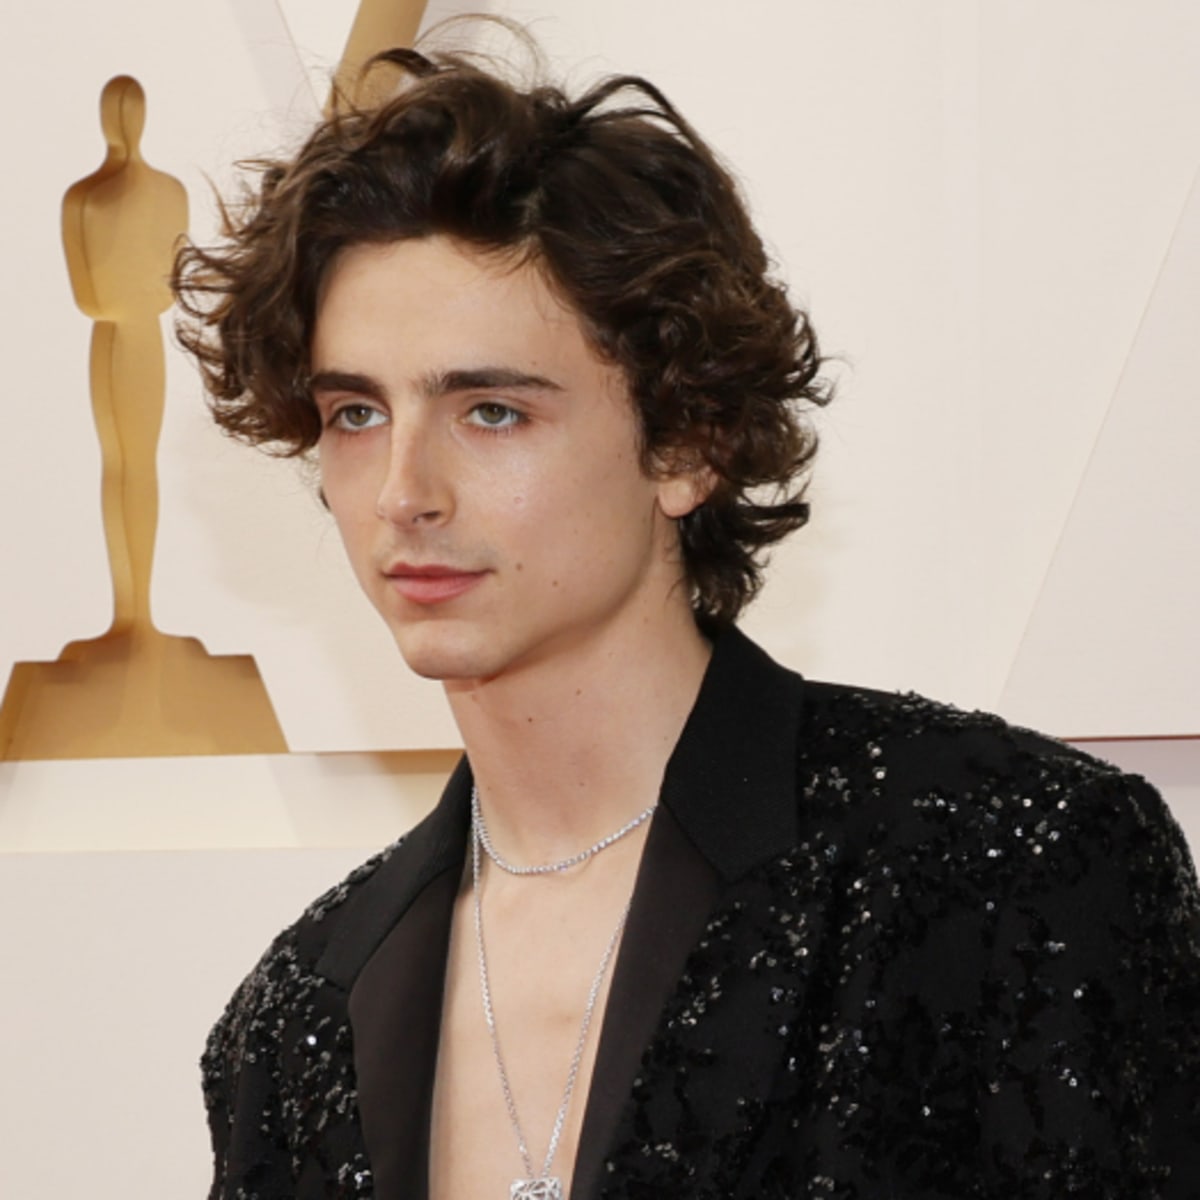 Oh My God, Timothée Chalamet Showed Up Shirtless to the Oscars - Fashionista